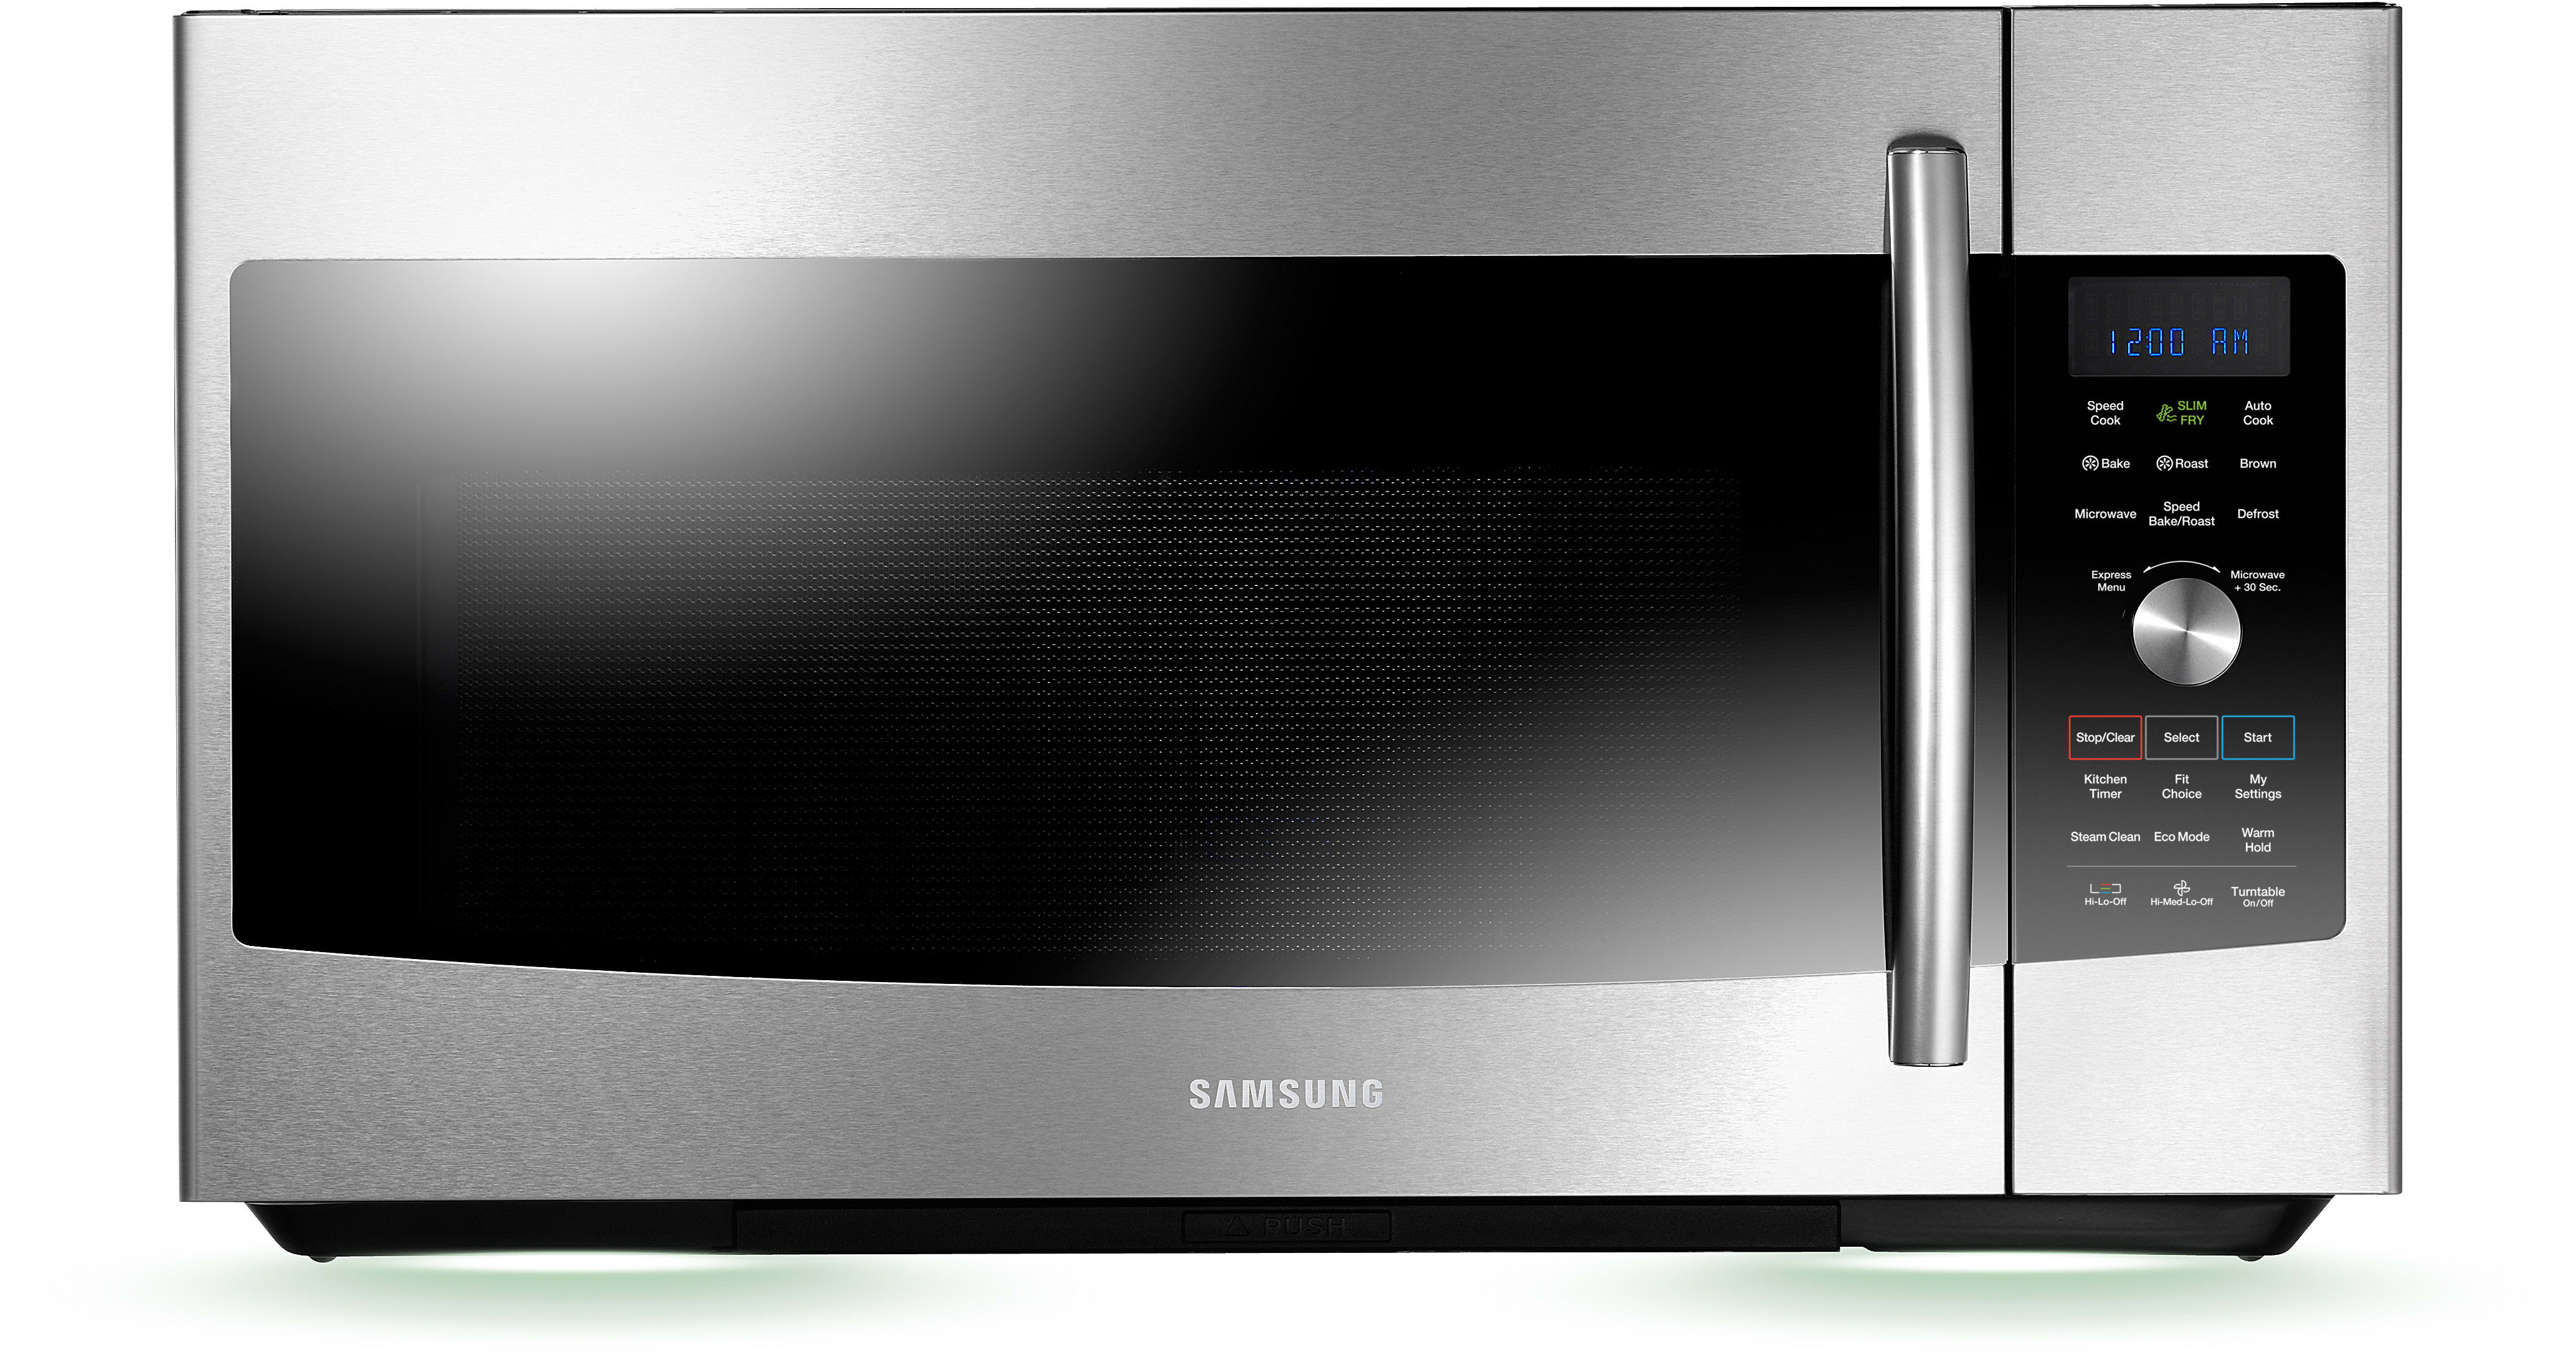 Samsung MC17F808KDT 1.7 cu. ft. Over-the-Range Microwave Oven with